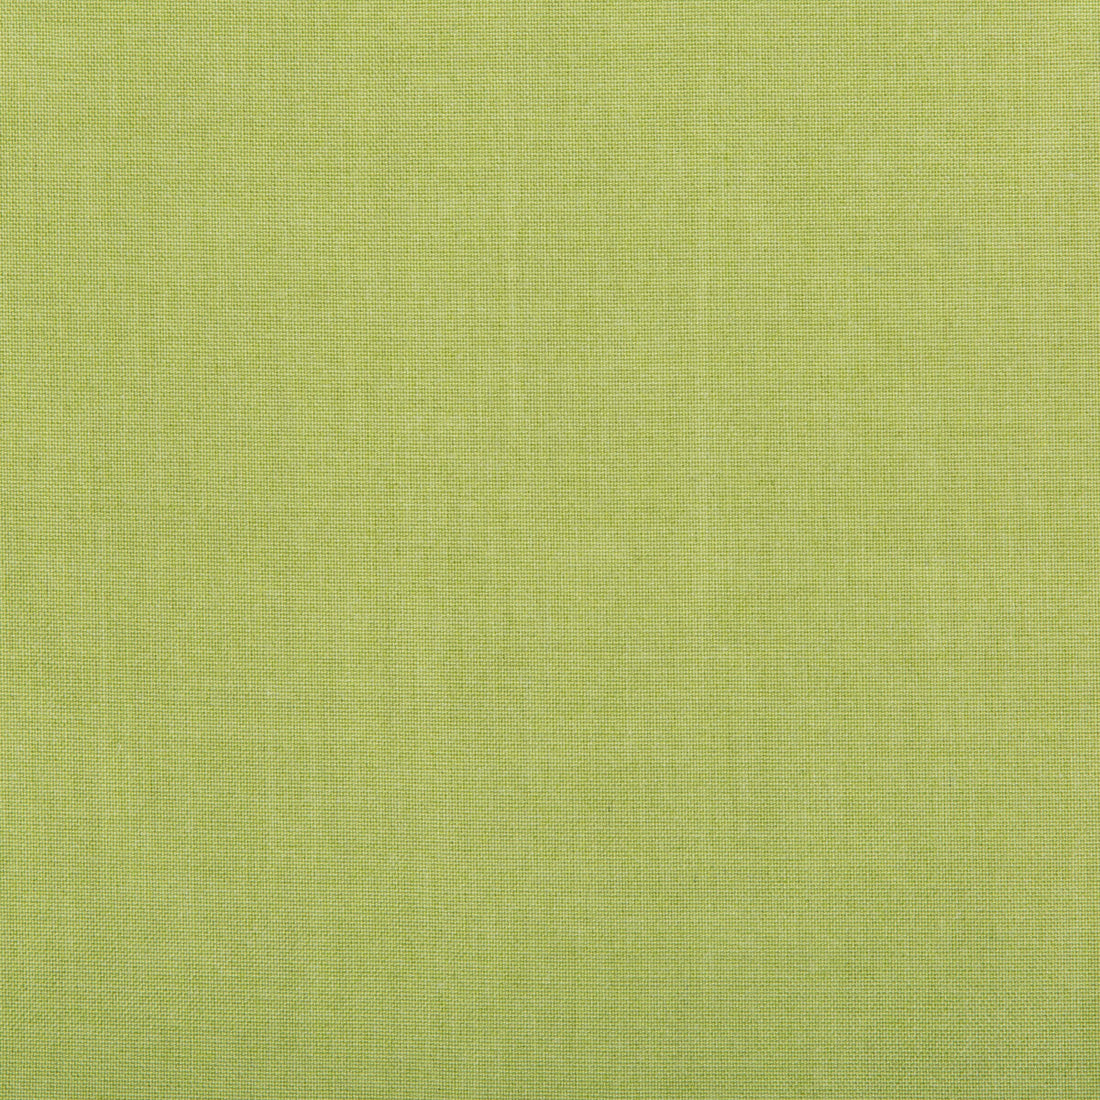 Kf Bas fabric - pattern 35372.3.0 - by Kravet Basics in the Performance Indoor Outdoor collection